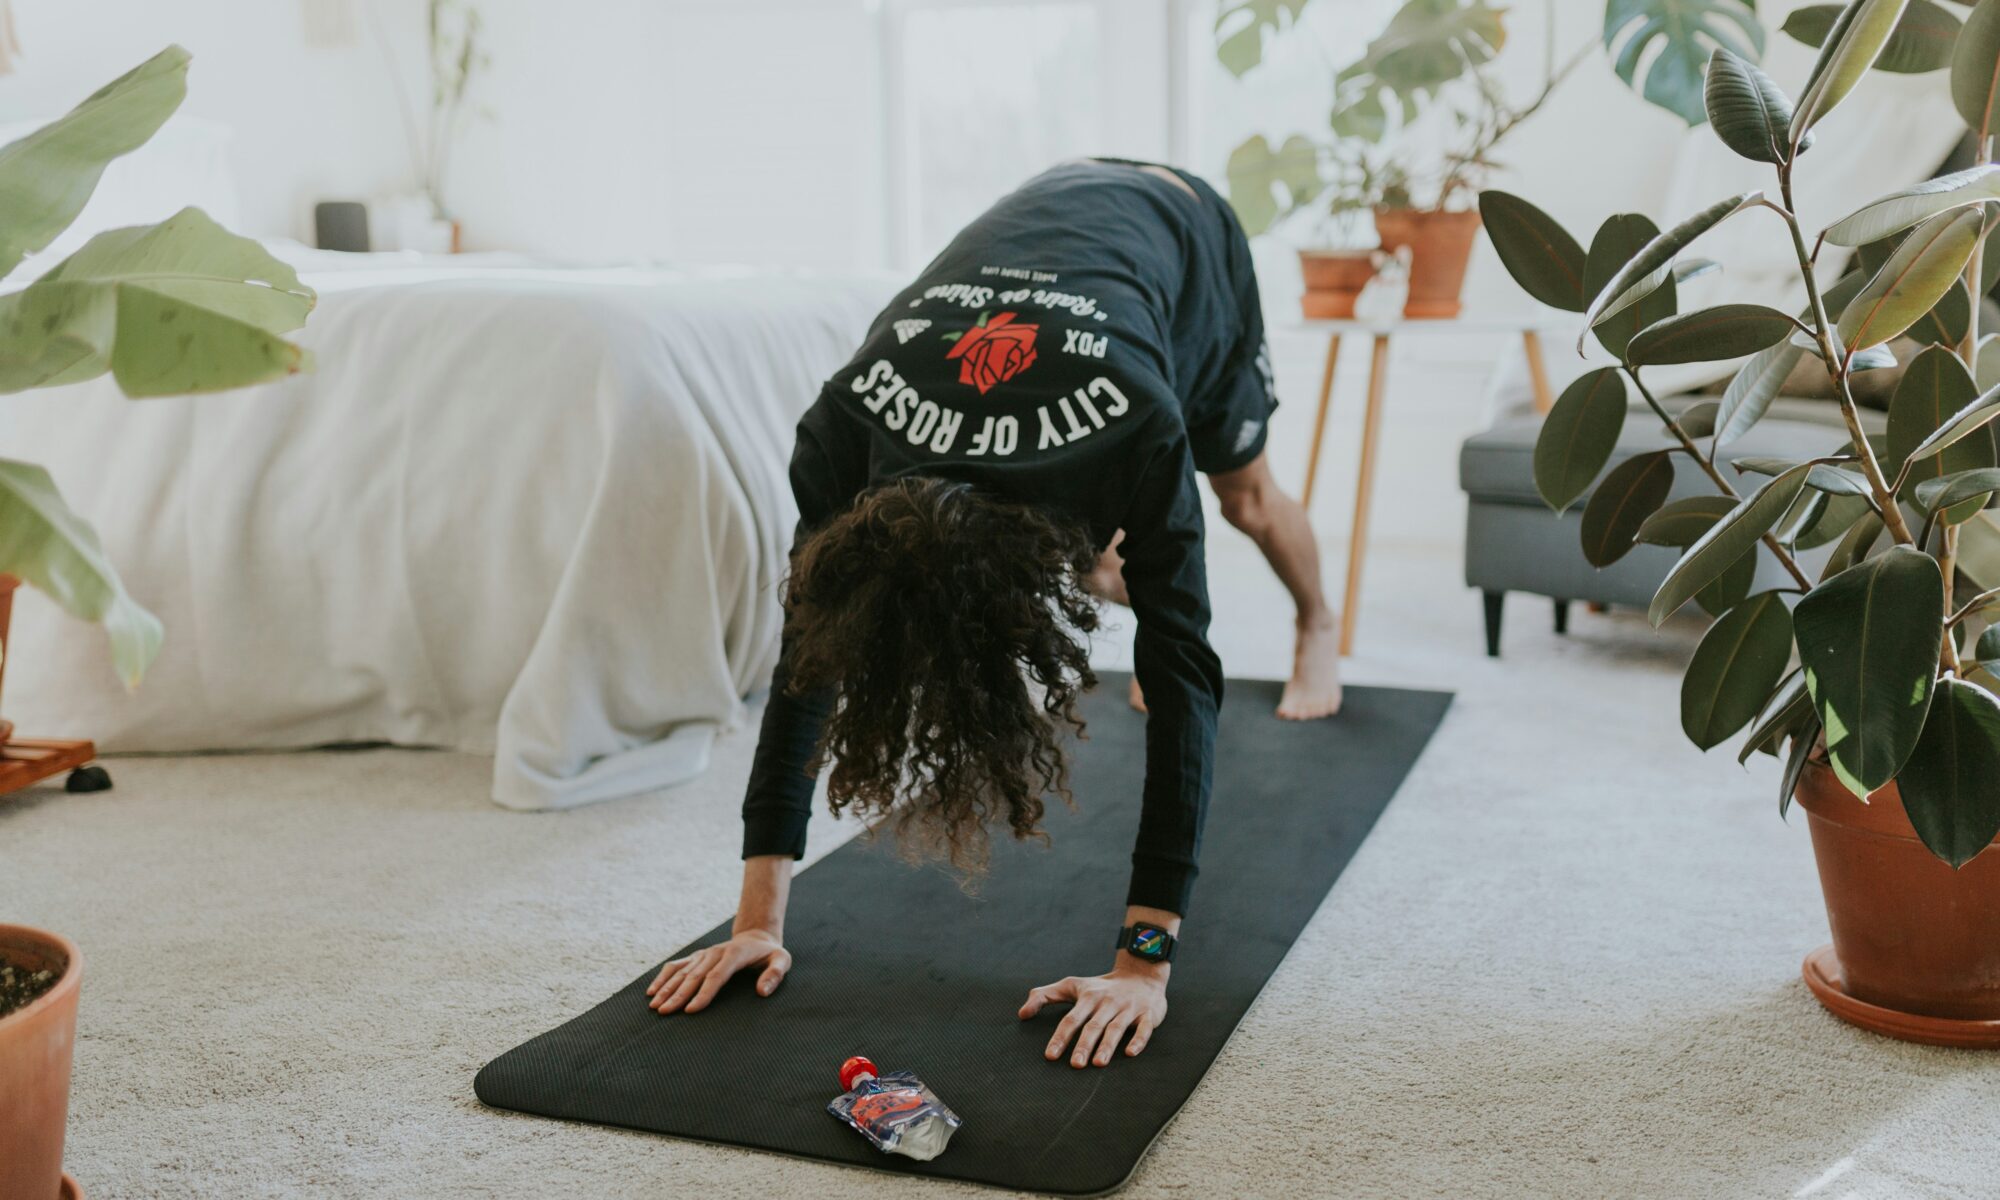 woman doing stretches atop a yoga mat